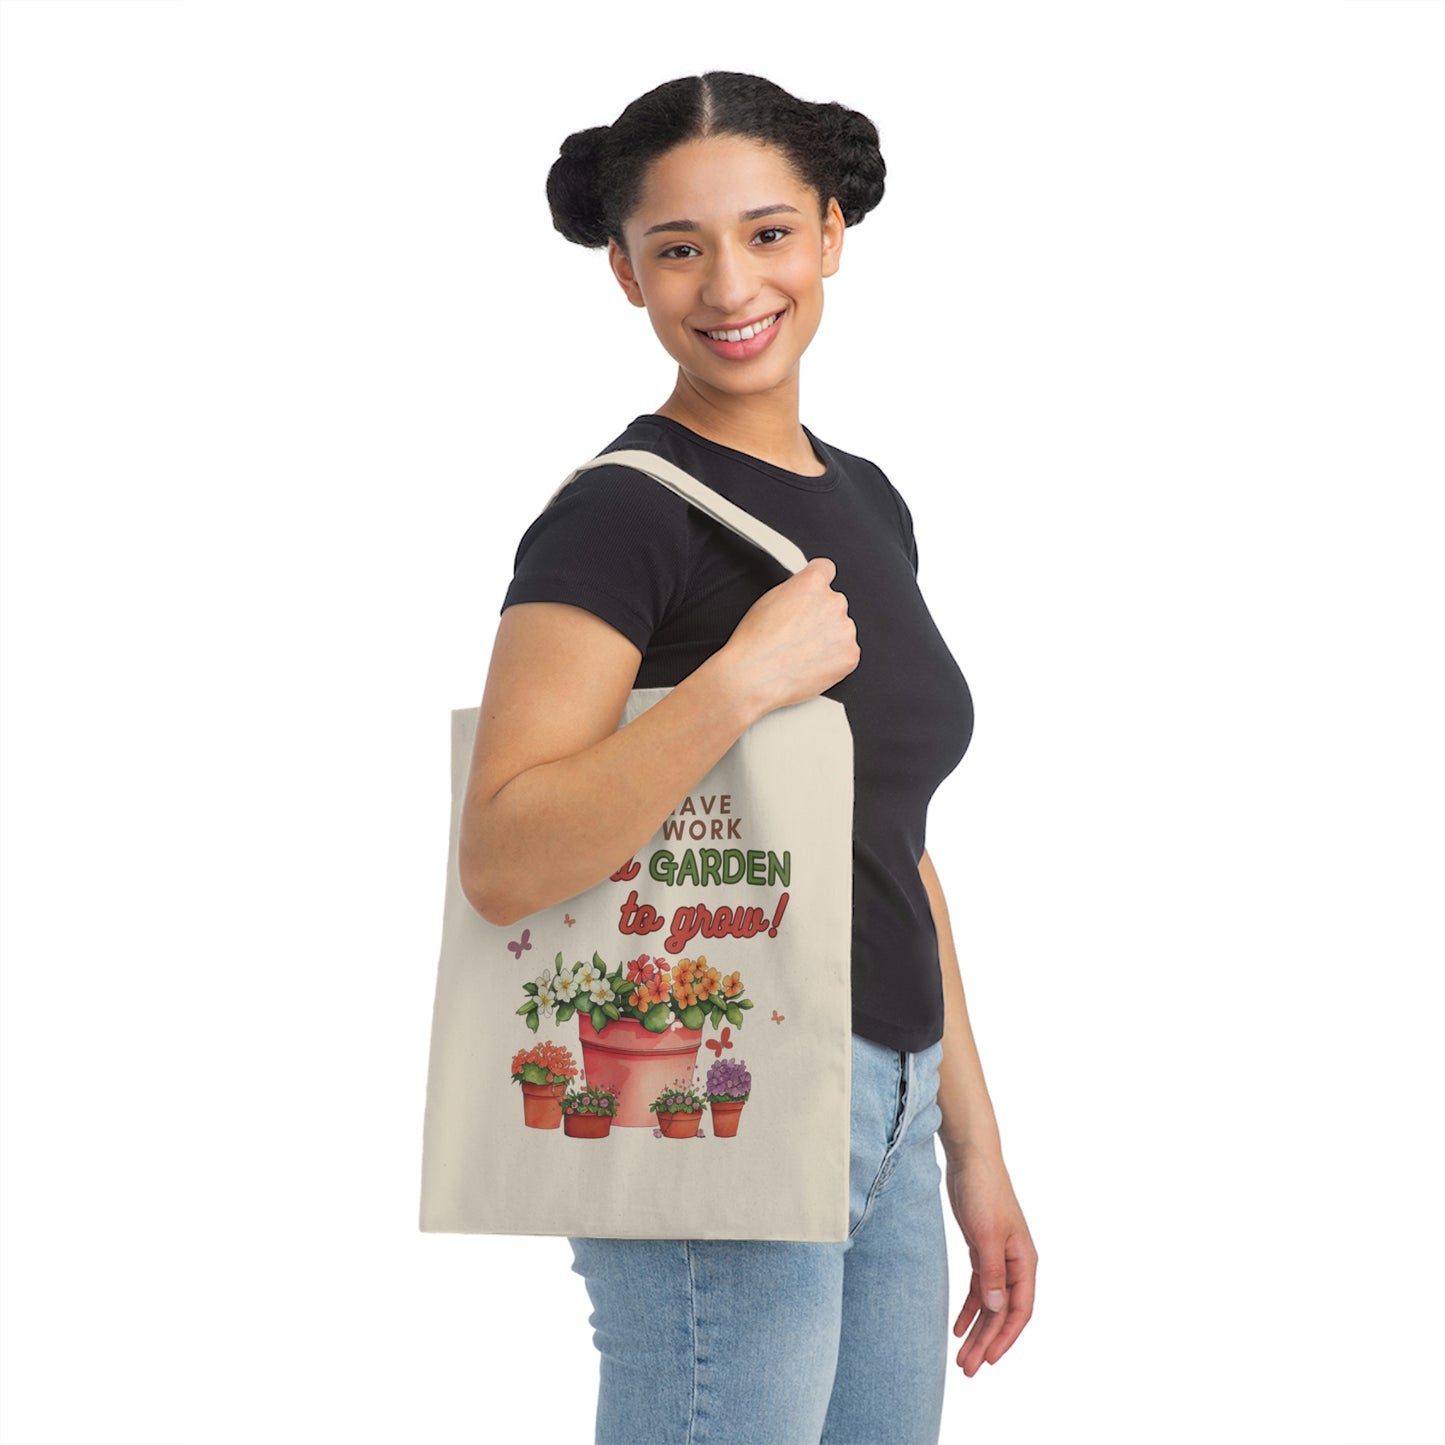 I Don't Have Time to Work I Have a Garden to Grow Canvas Tote Bag